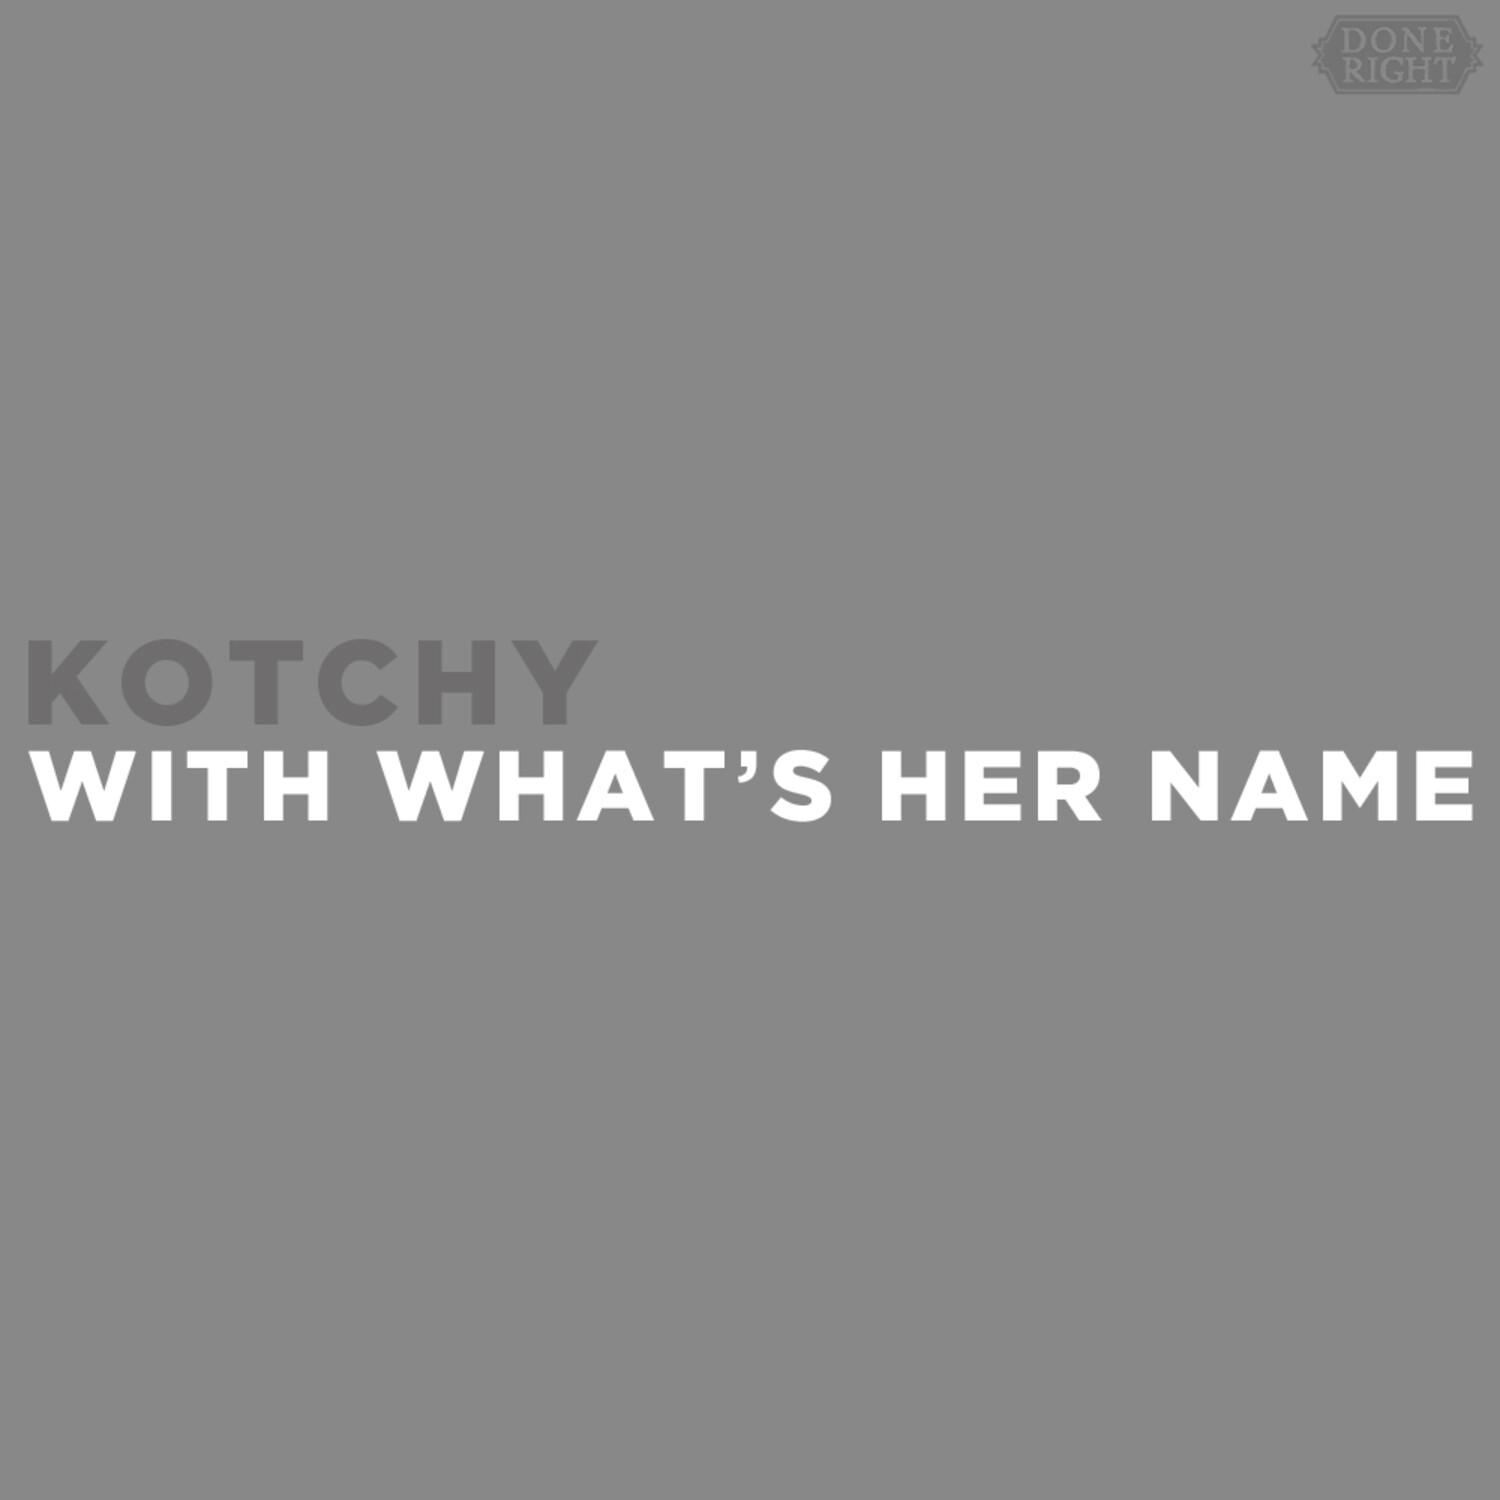 With What's Her Name